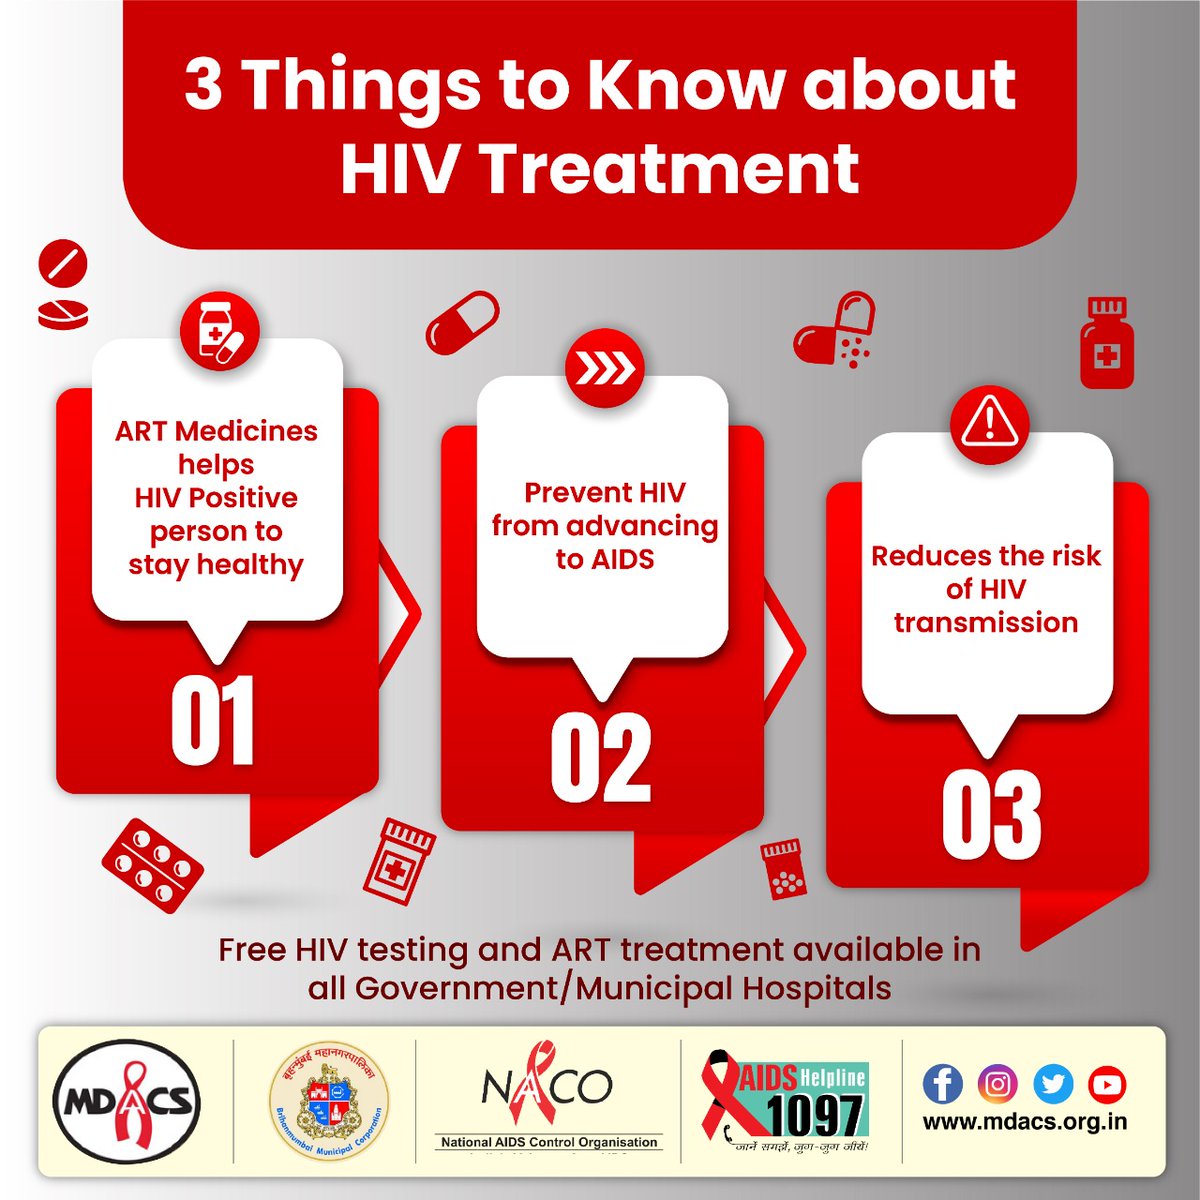 ART Medicines can help #HIV Positive person to stay healthy
Free #HIVtesting n ART treatment available in all Government/Municipal Hospitals
To know more #dial1097 or visit mdacs.org.in
#GetTested | #KnowYourStatus | #ARTtreatment
#MDACS #MDACSindia #NACO #Mumbai #GOI